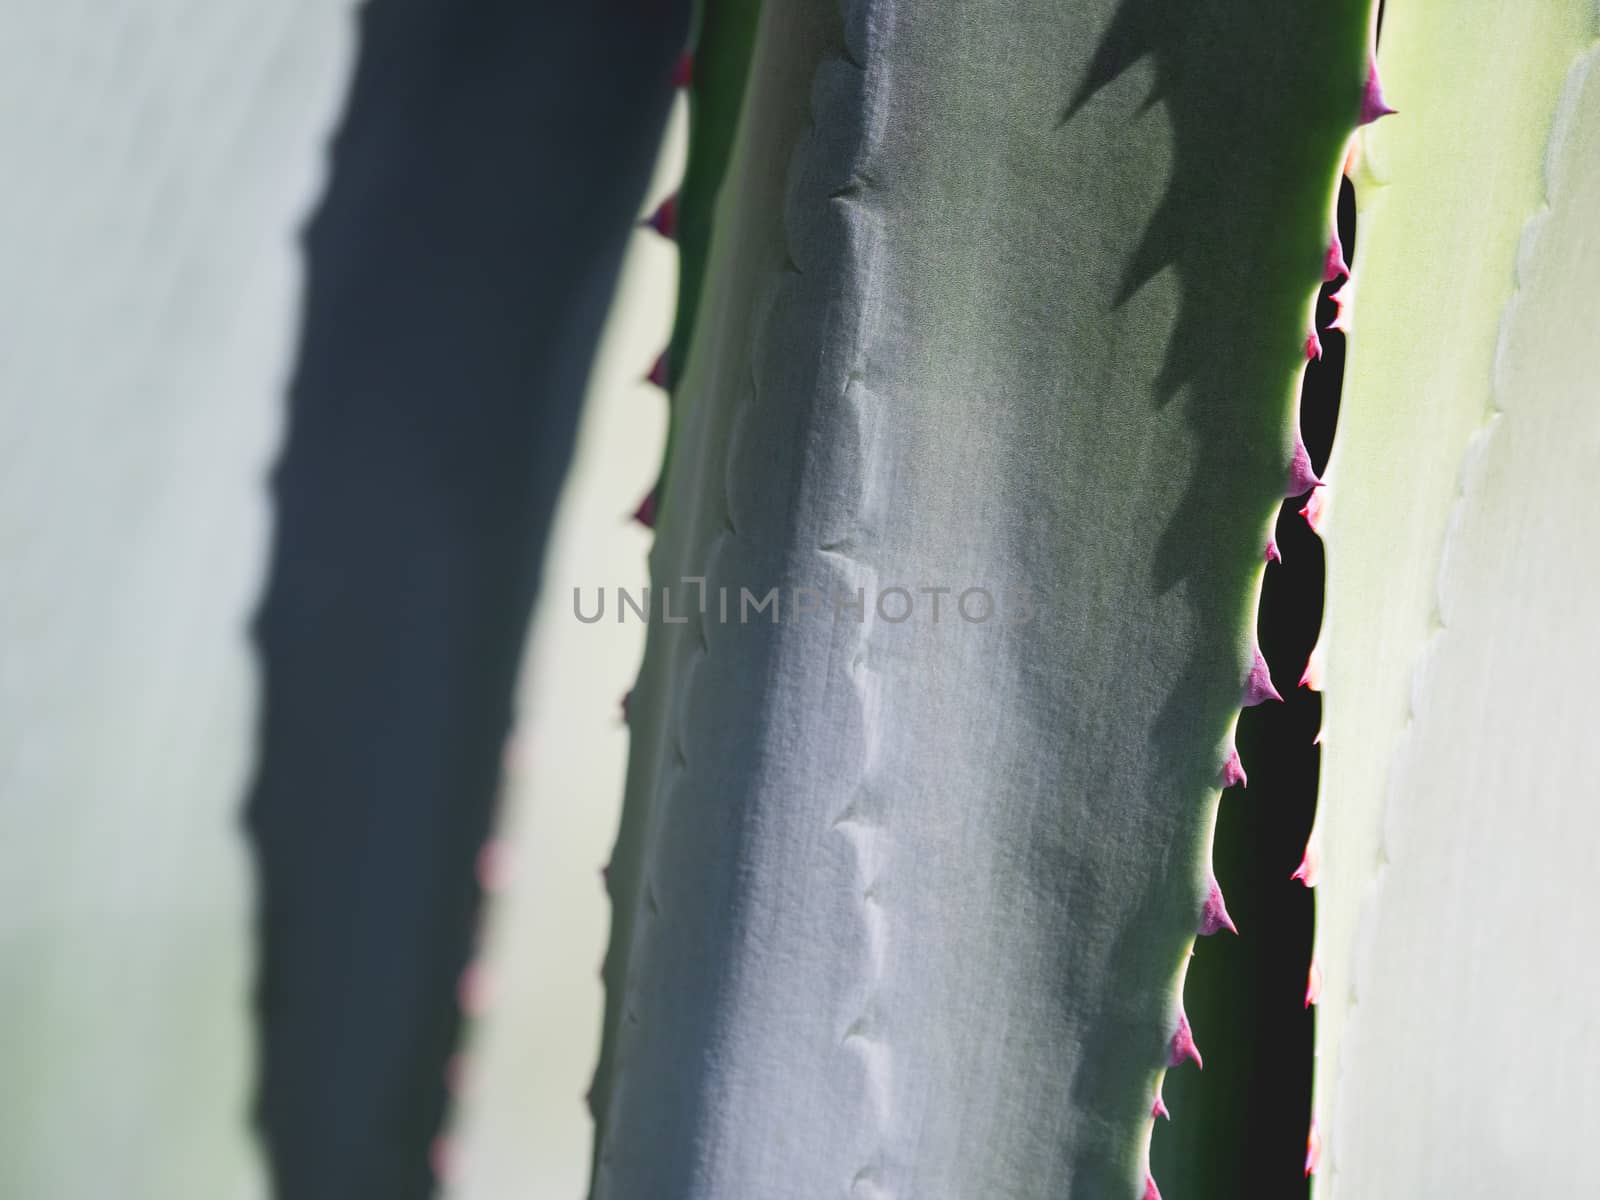 Cactus leaves with spikes. Natural background with a prickly plant. by aksenovko